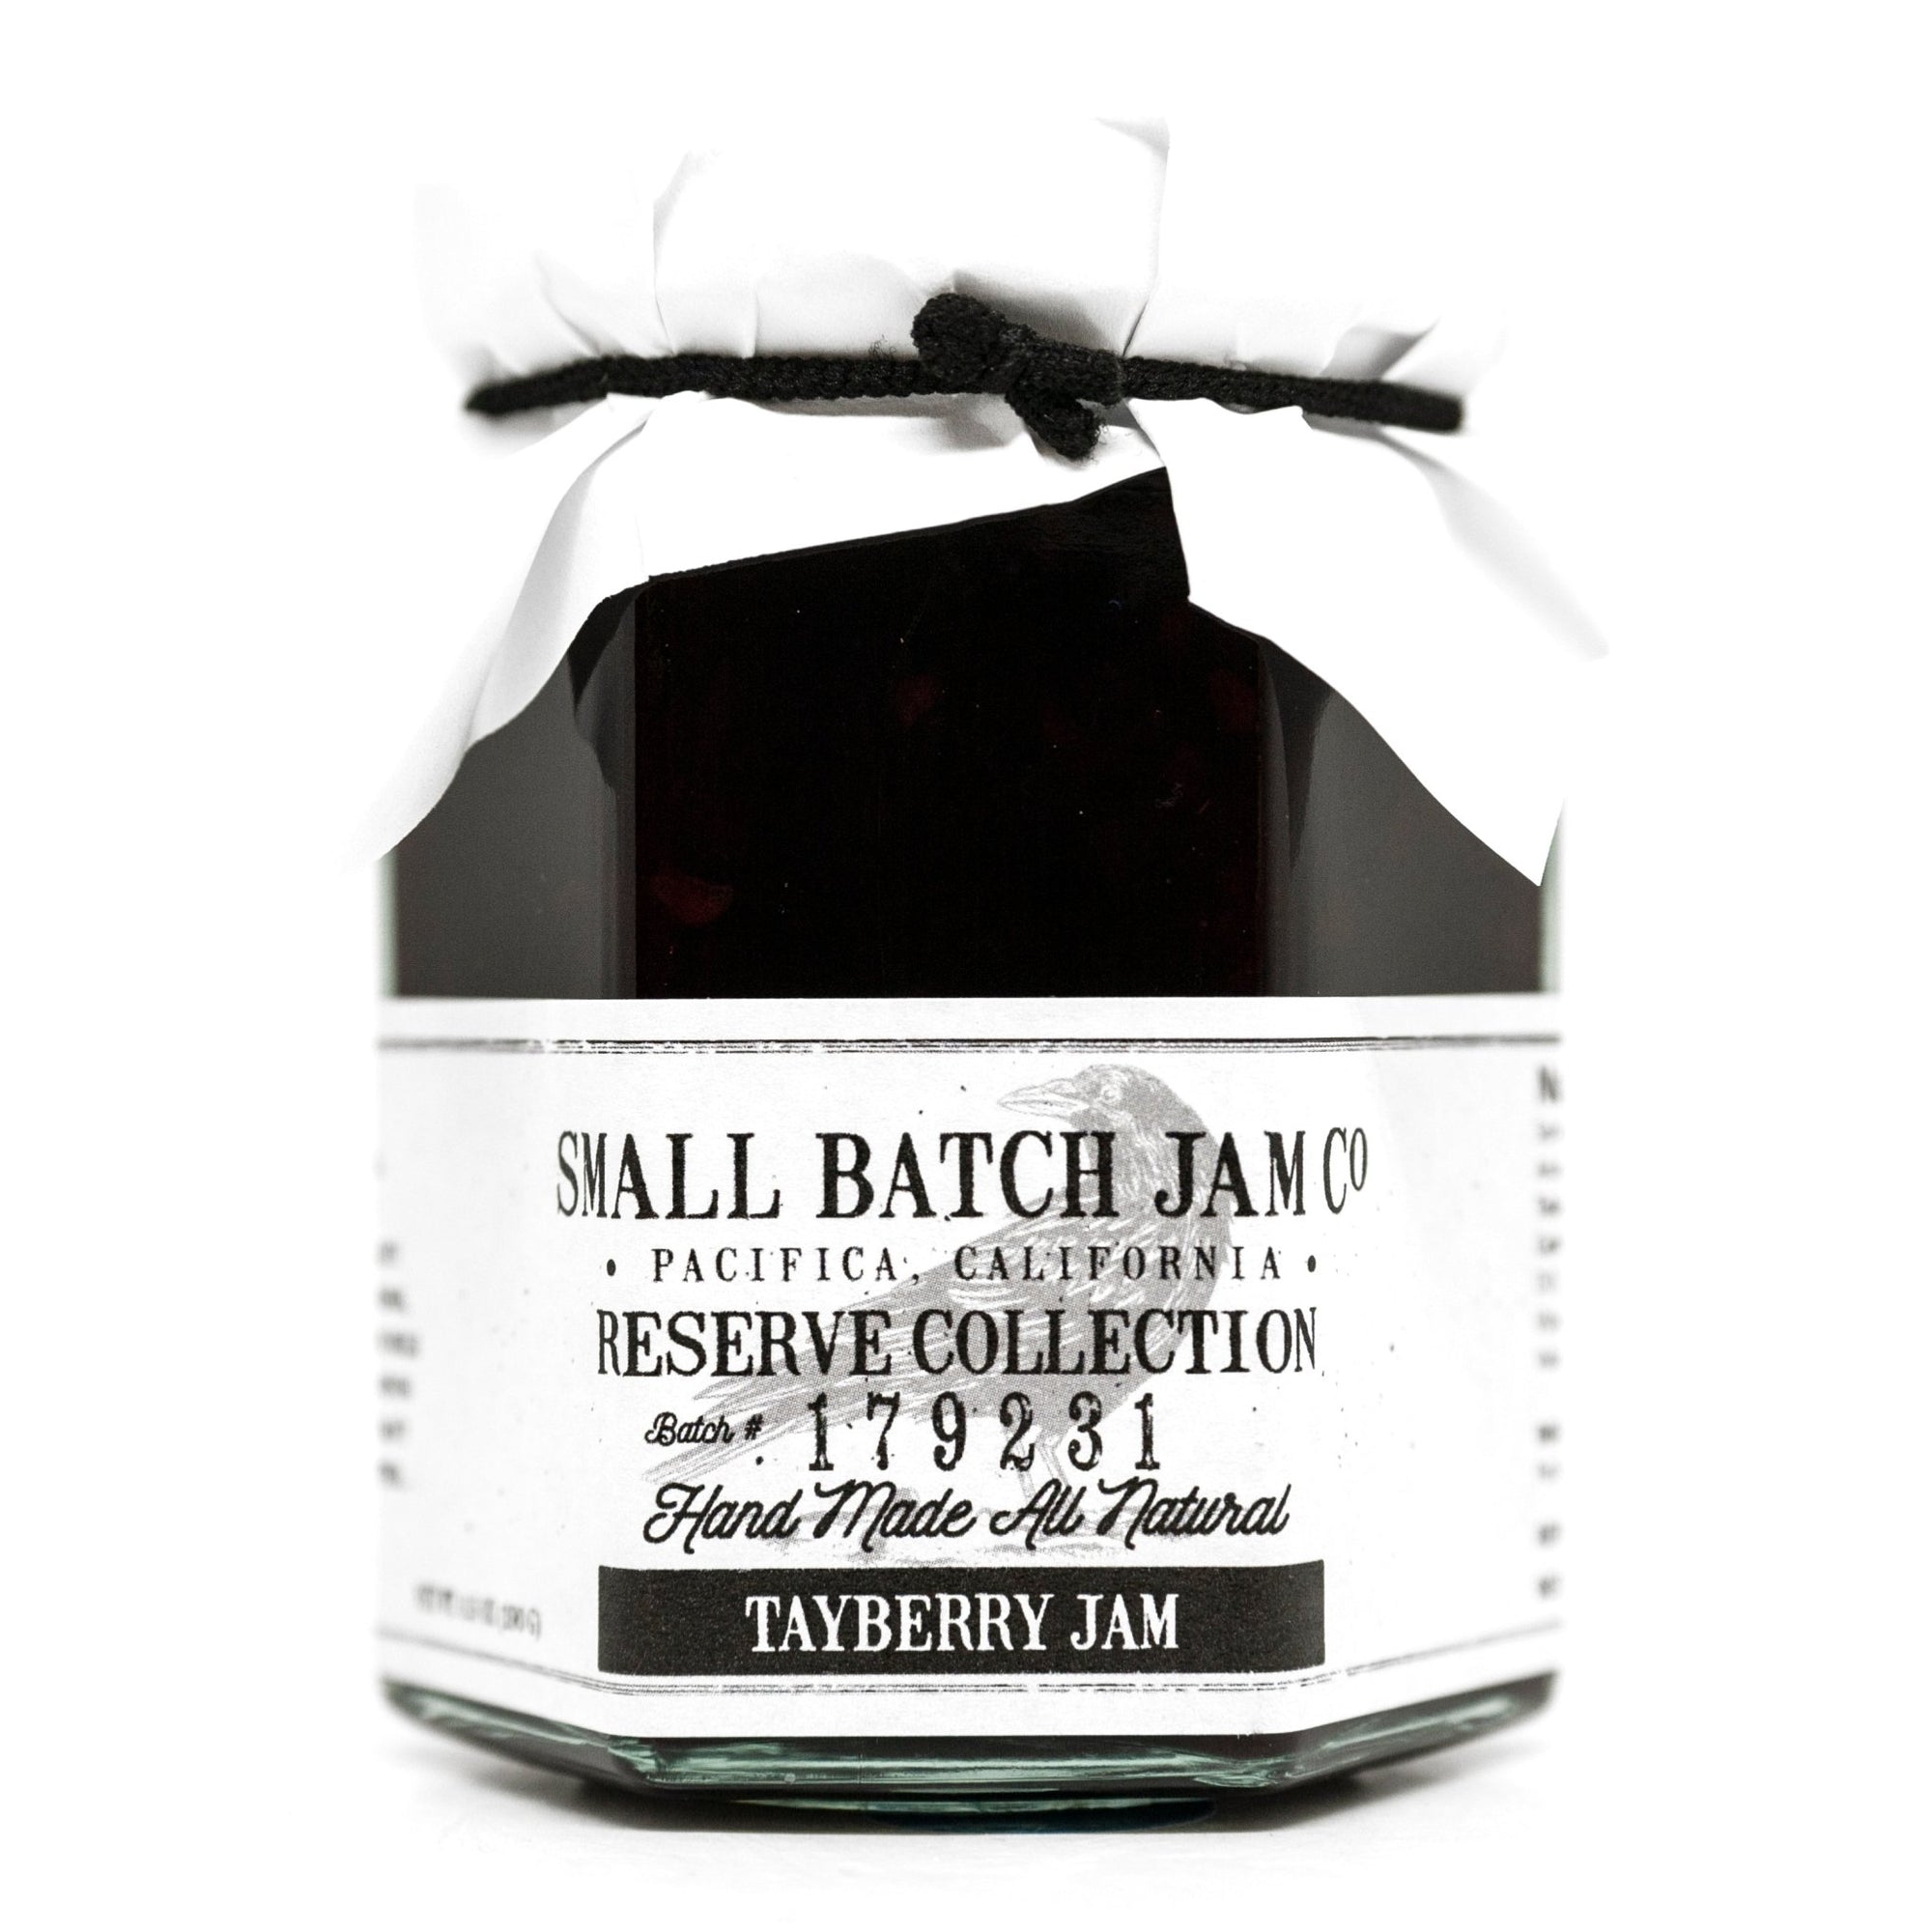 Tayberry Jam - Reserve Collection - Small Batch Jam Co